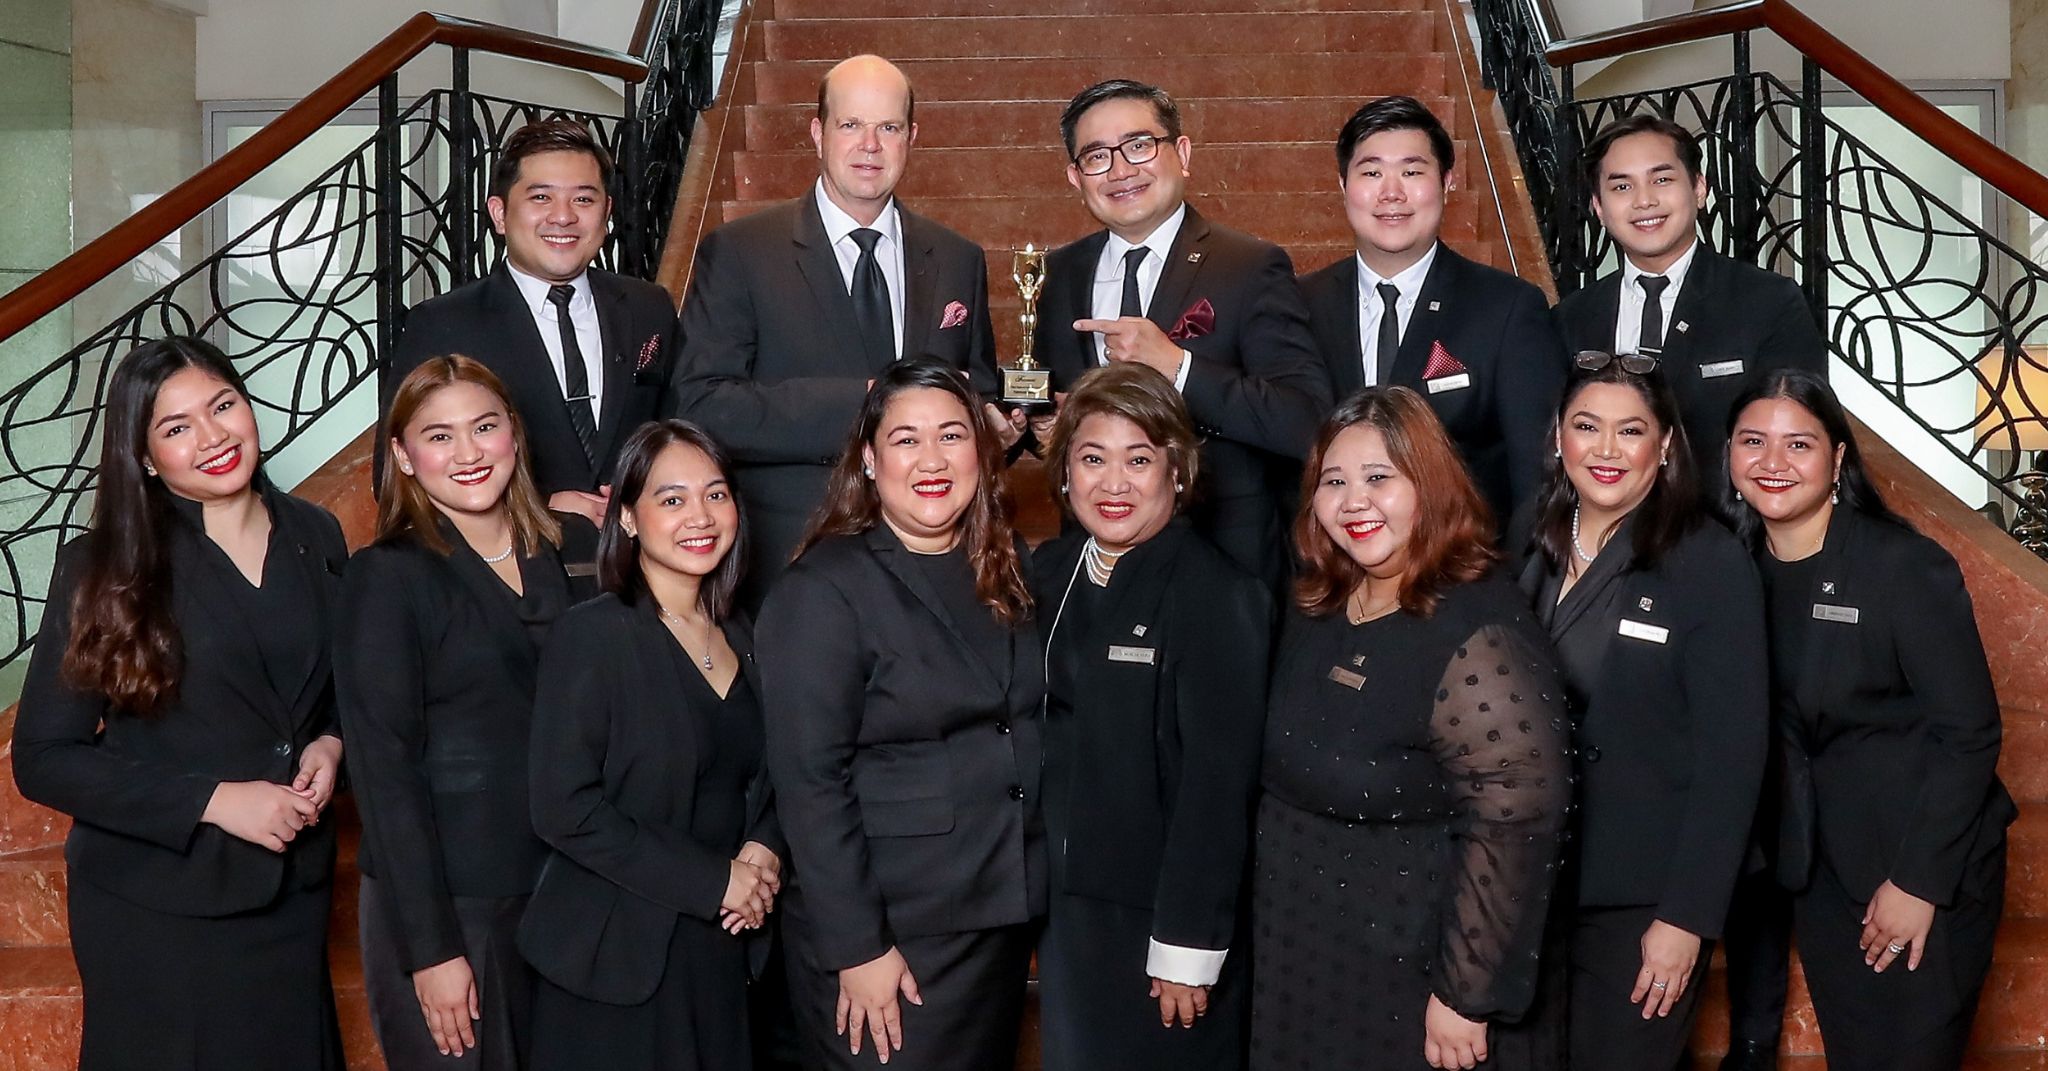 Fairmont Makati receives recognition from HQ